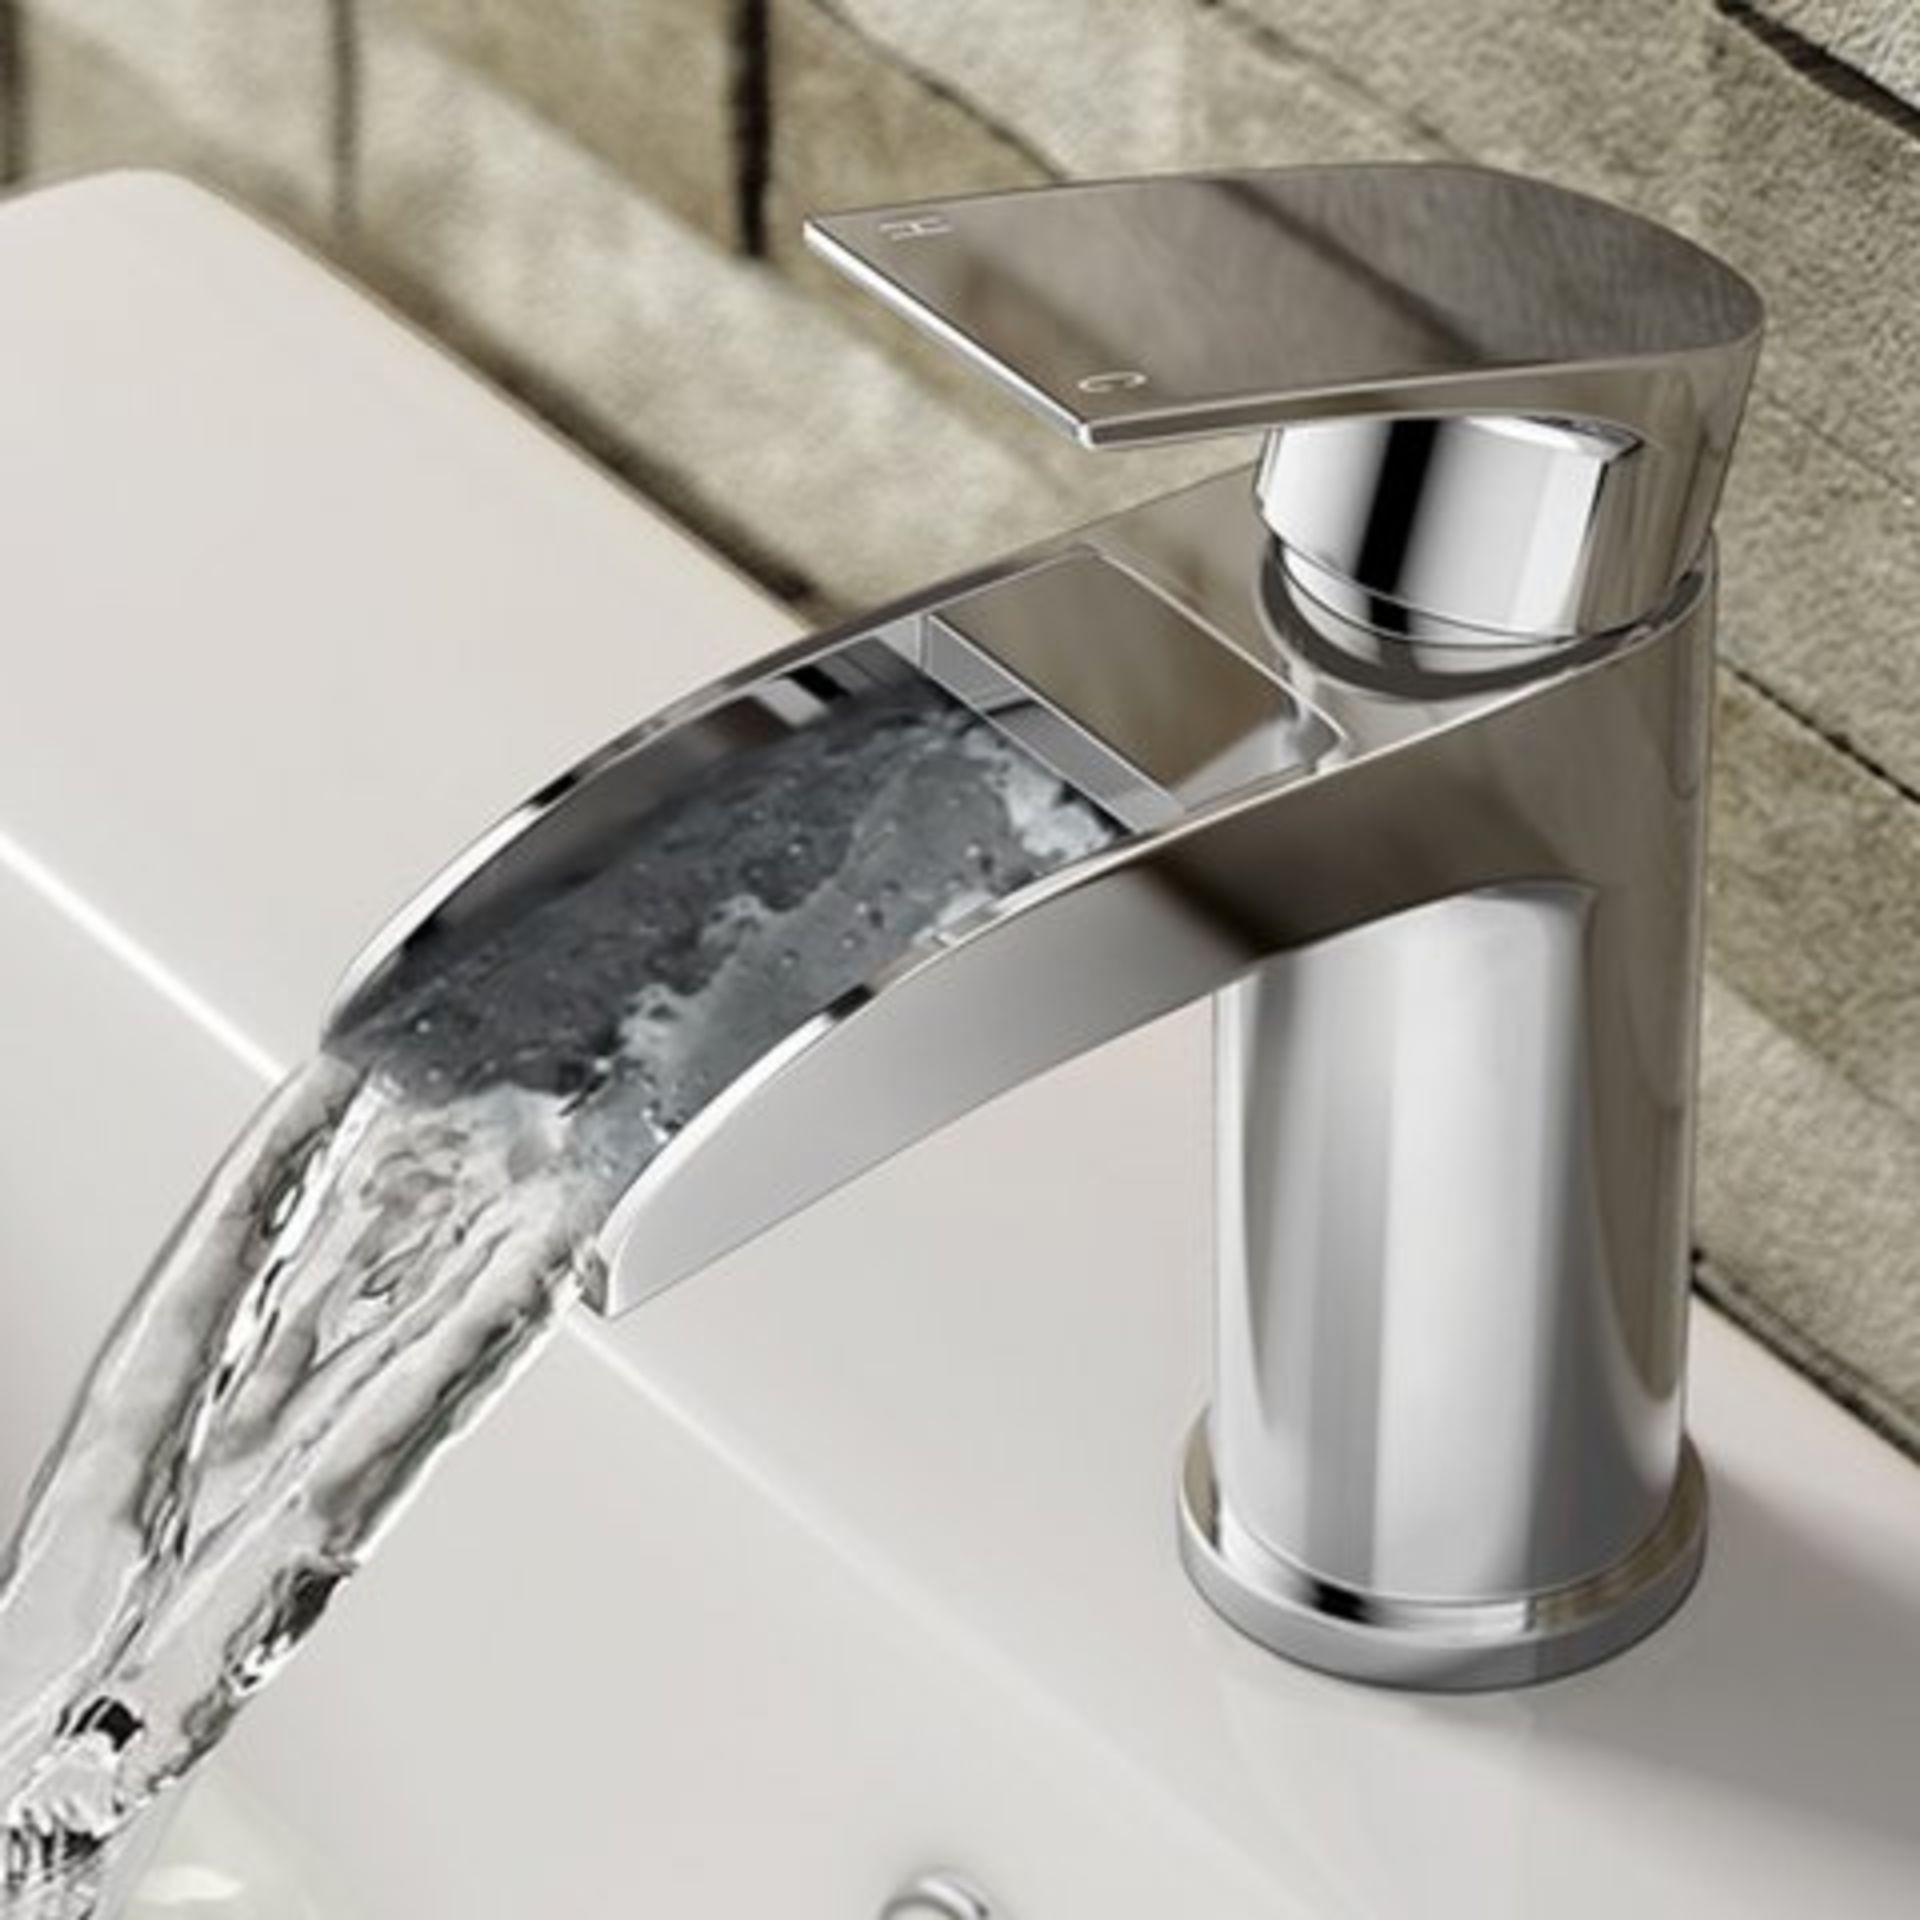 (H115) Avis II Waterfall Basin Mixer Tap Waterfall Feature Our range of waterfall taps add a touch